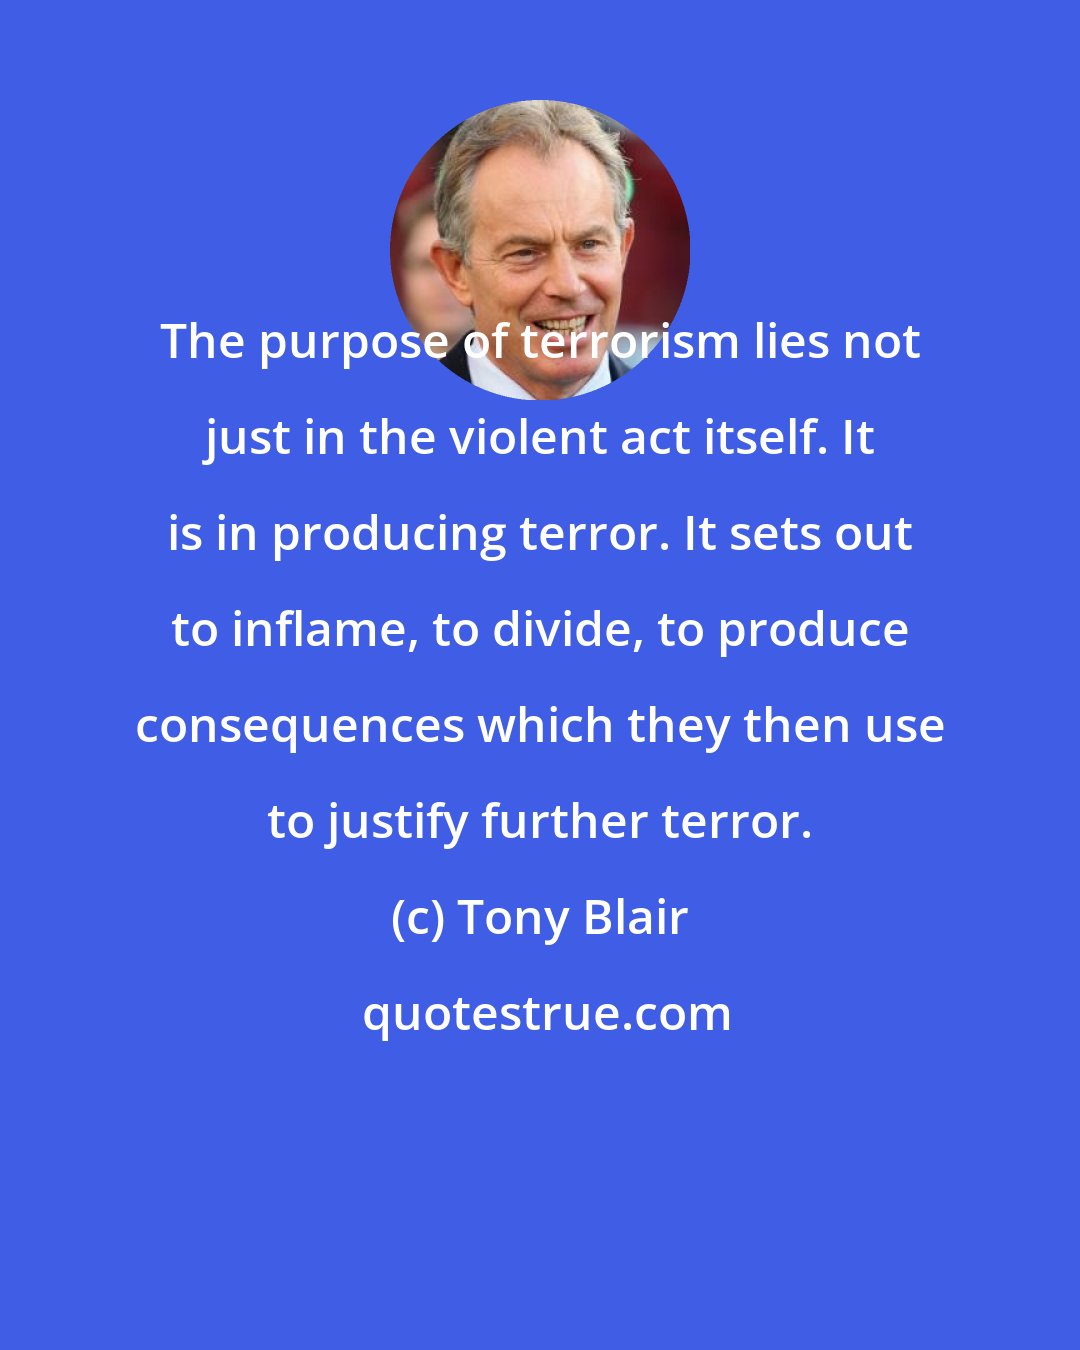 Tony Blair: The purpose of terrorism lies not just in the violent act itself. It is in producing terror. It sets out to inflame, to divide, to produce consequences which they then use to justify further terror.